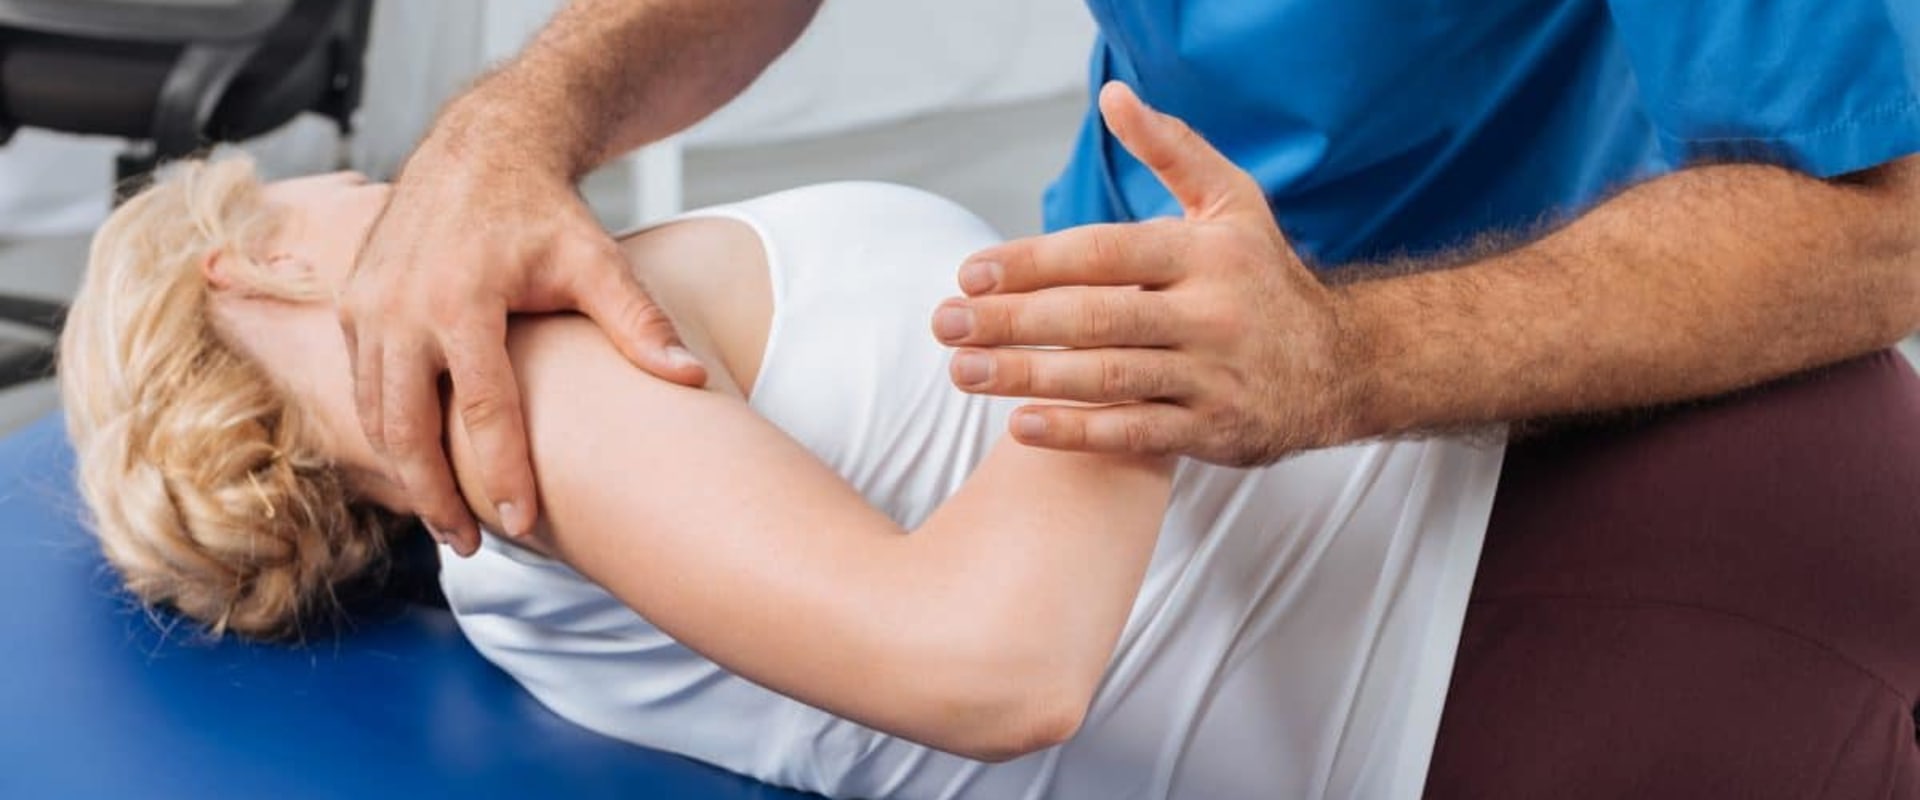 How fast does a chiropractor work?